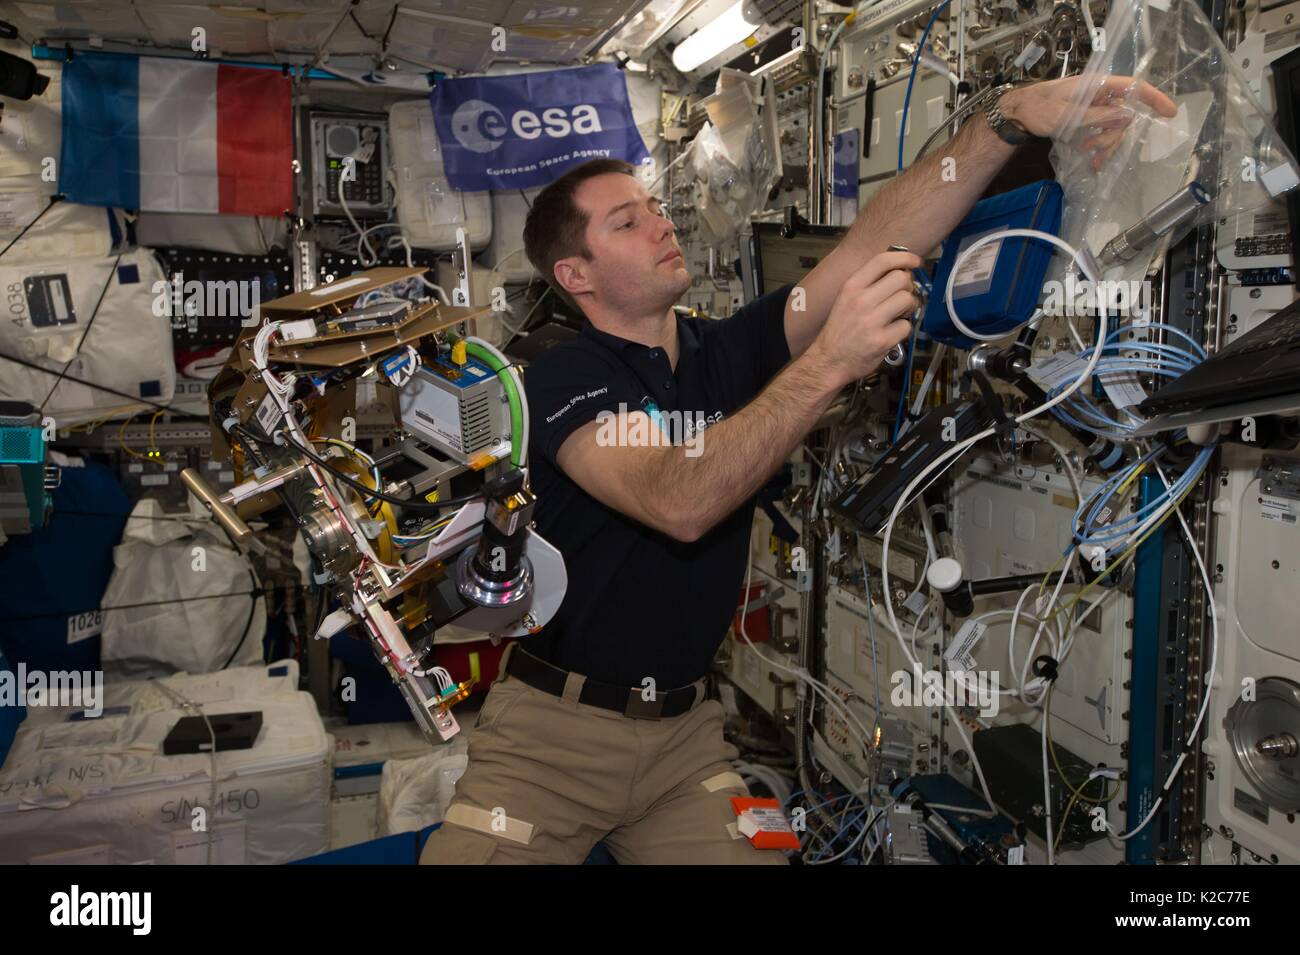 NASA International Space Station Expedition 51 prime crew member French astronaut Thomas Pesquet of the European Space Agency works inside the Columbus Laboratory Module May 2, 2017 in Earth orbit. Stock Photo